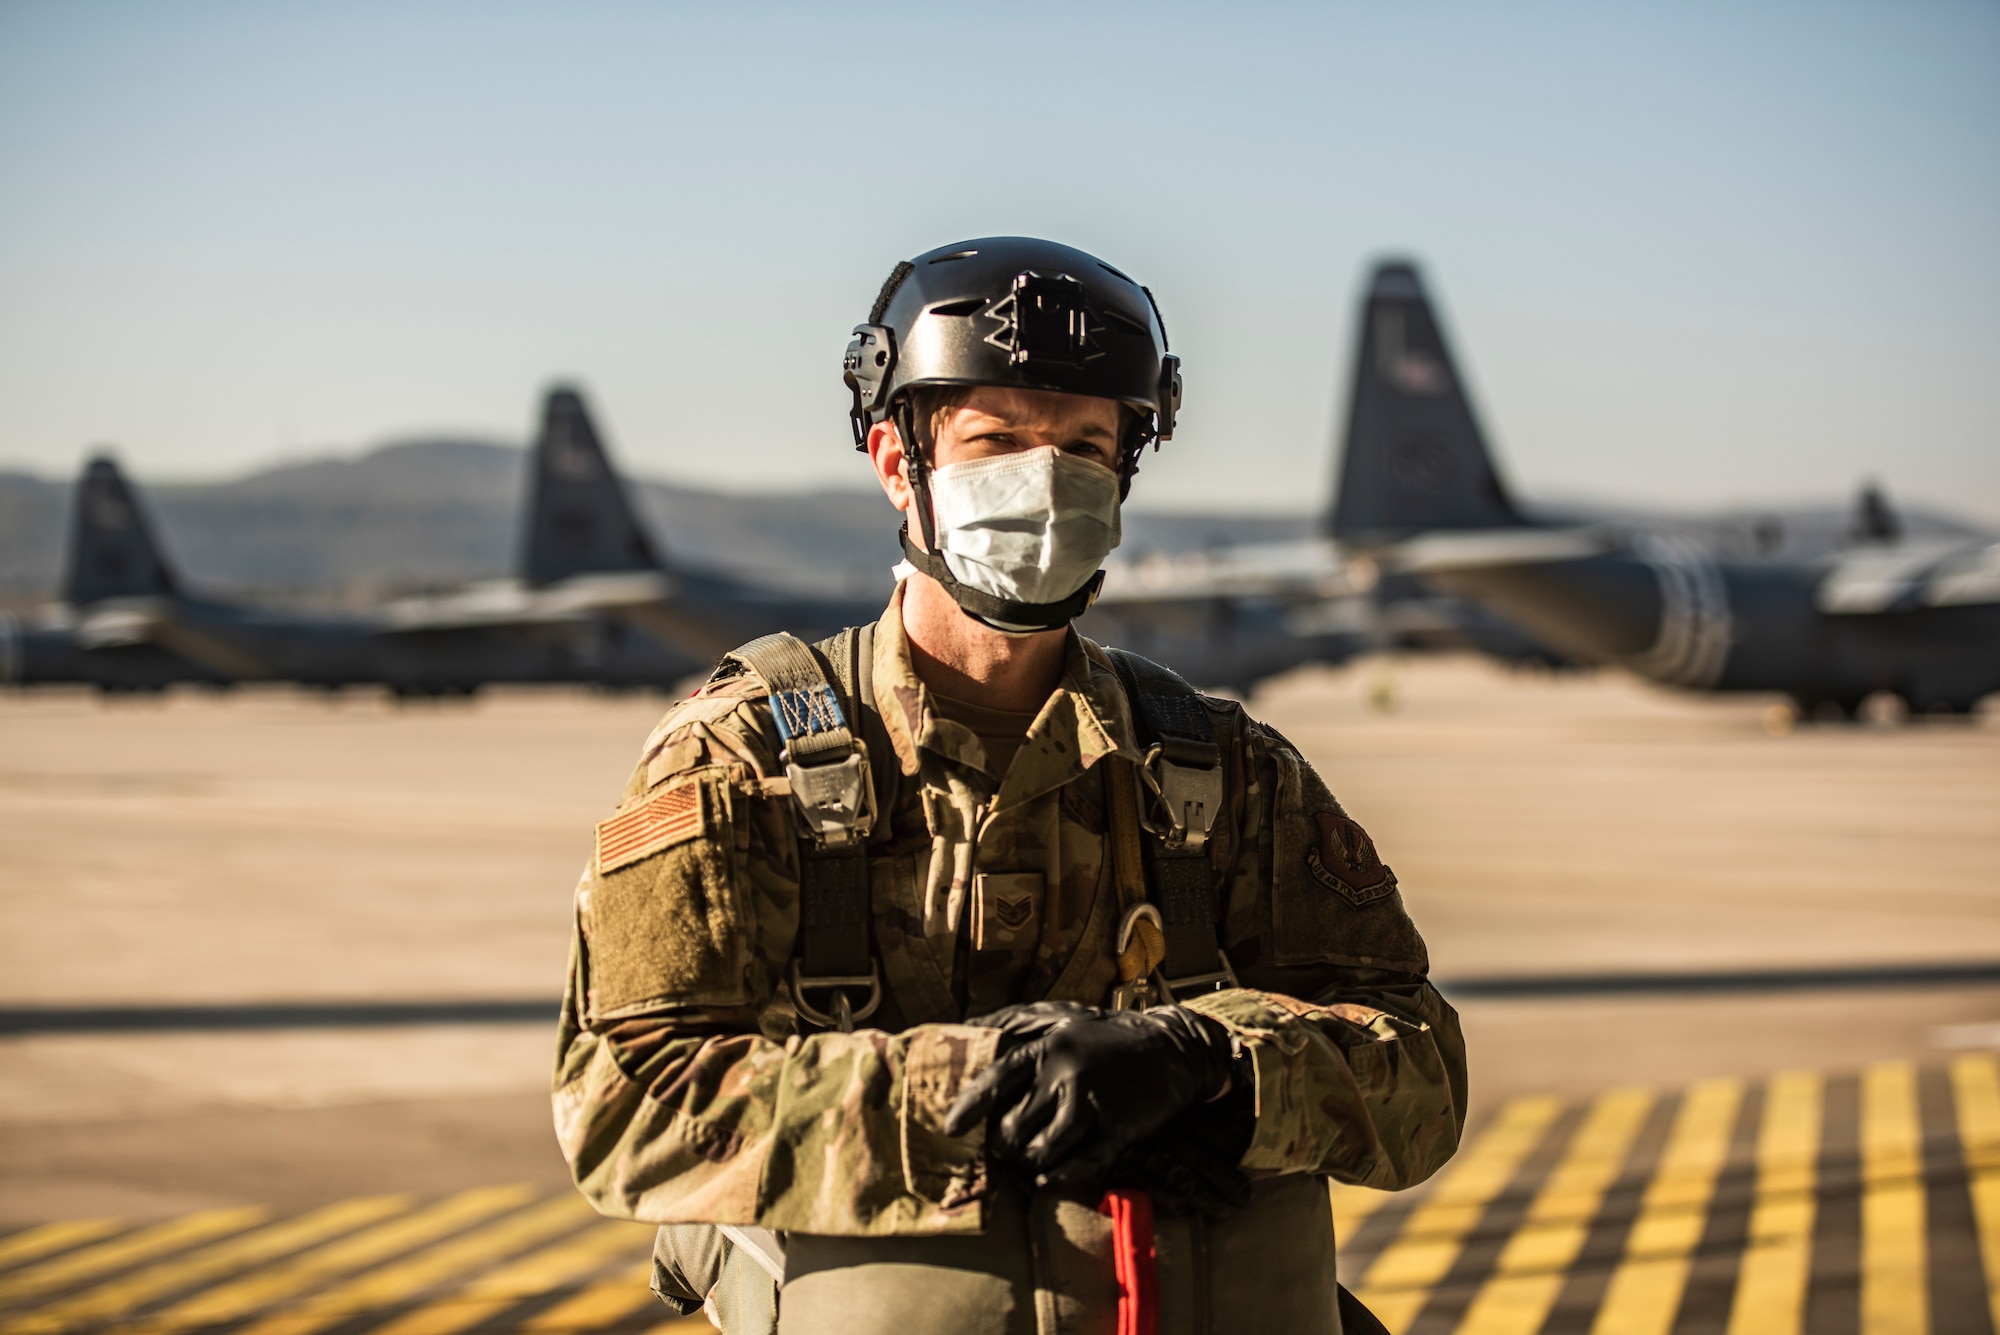 An Airman poses with their parachute on in front of C-130J Super Hercules aircraft.